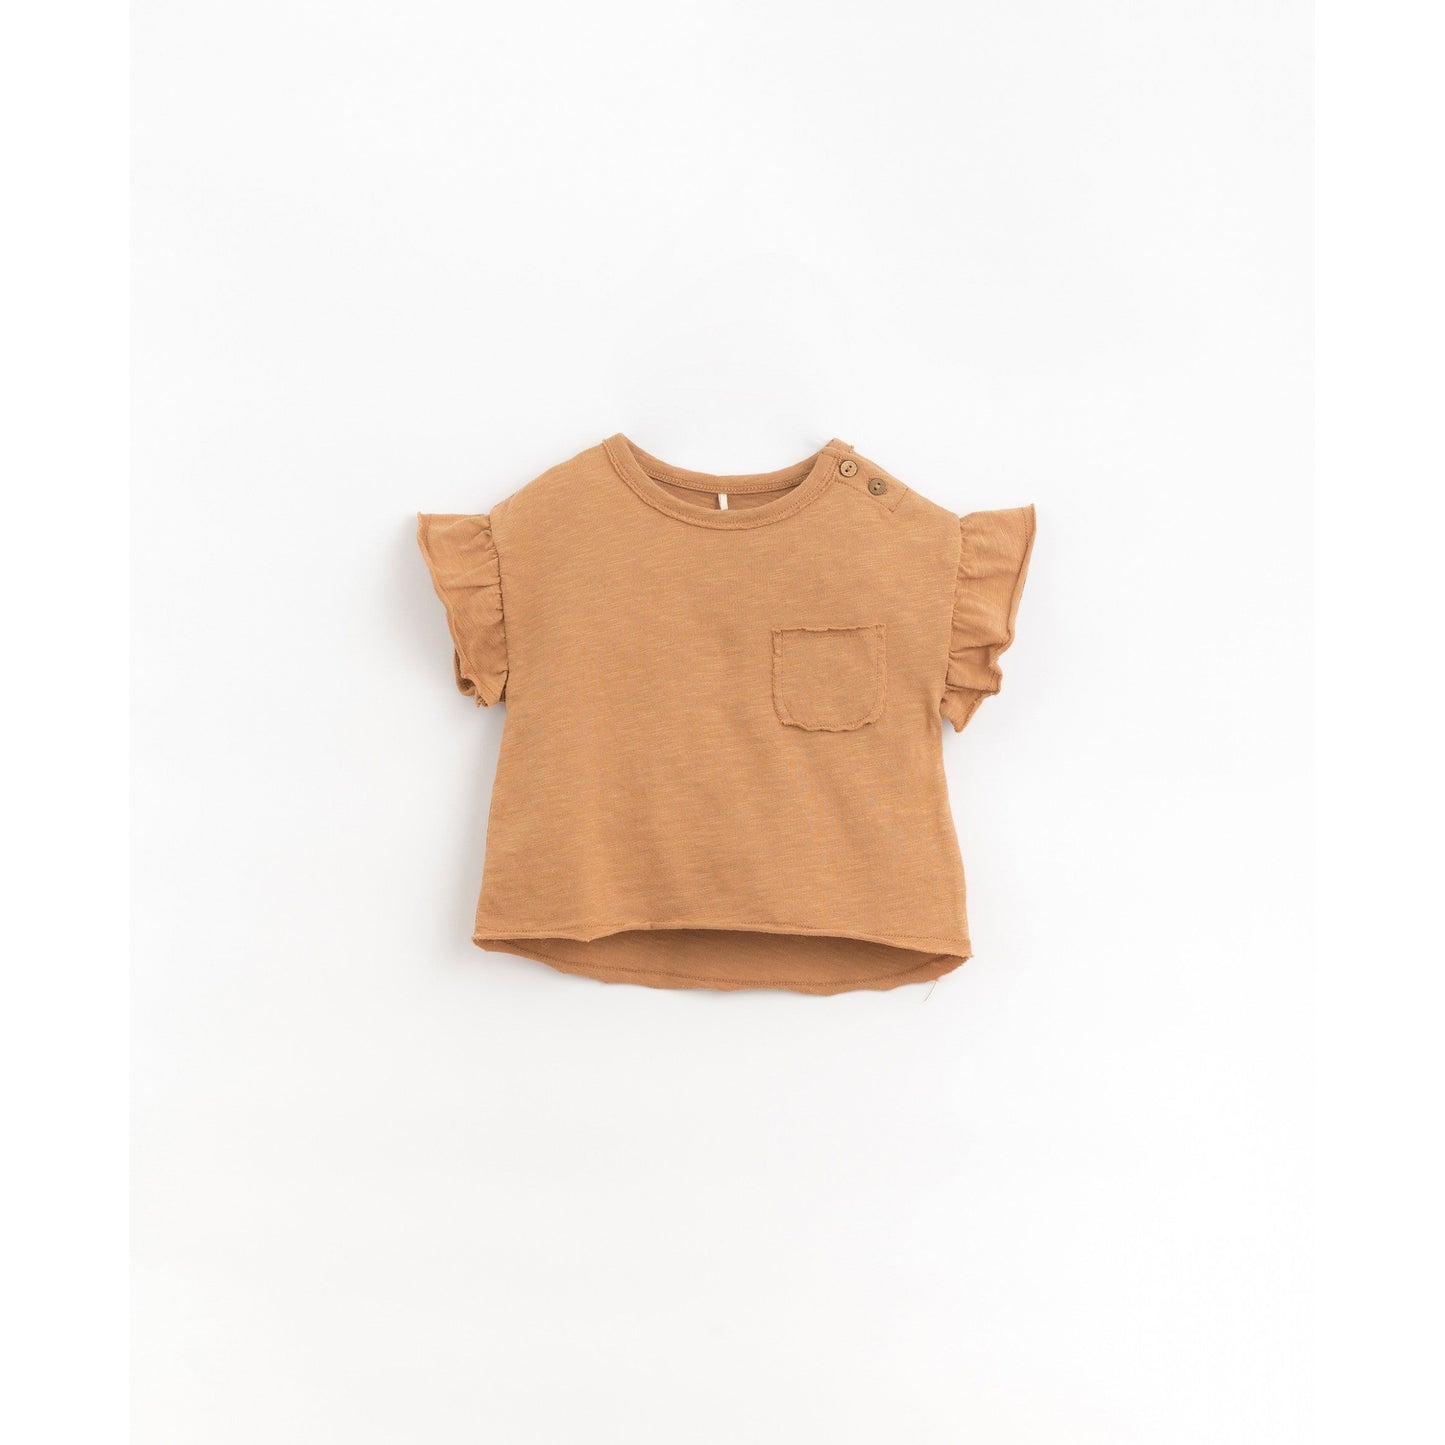 T-shirt in organic cotton with a front pocket